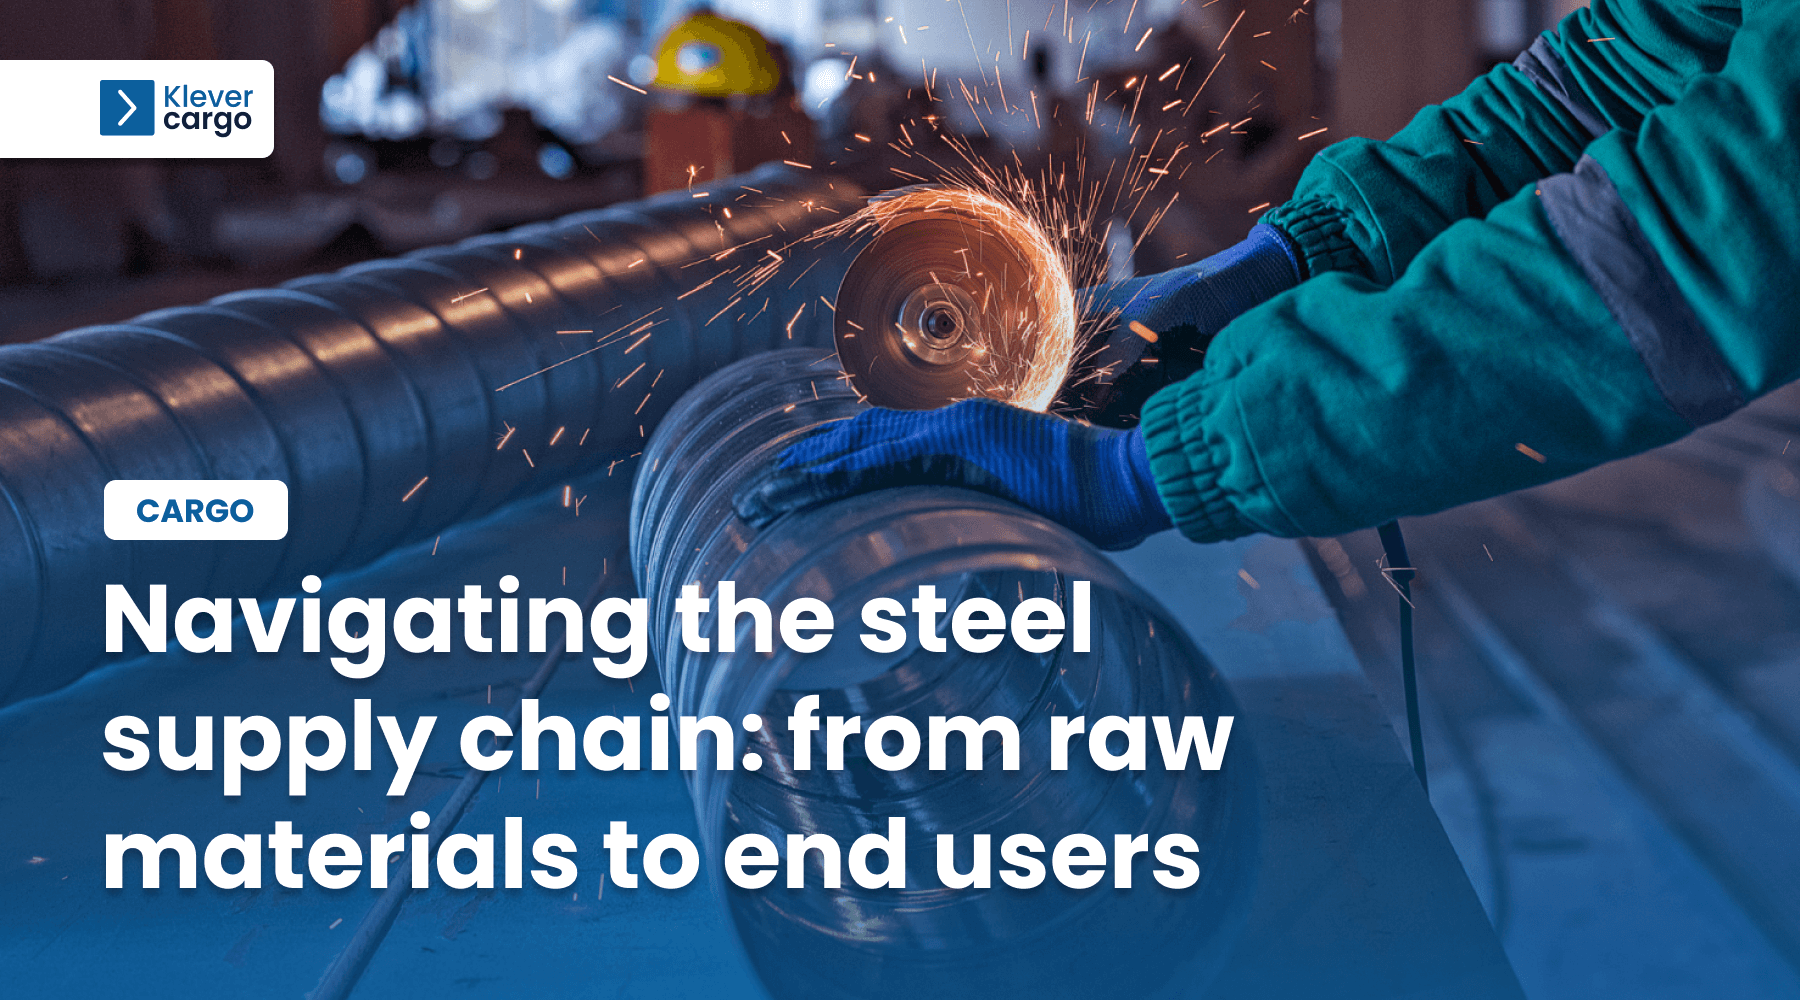 Navigating the steel supply chain: from raw materials to end users